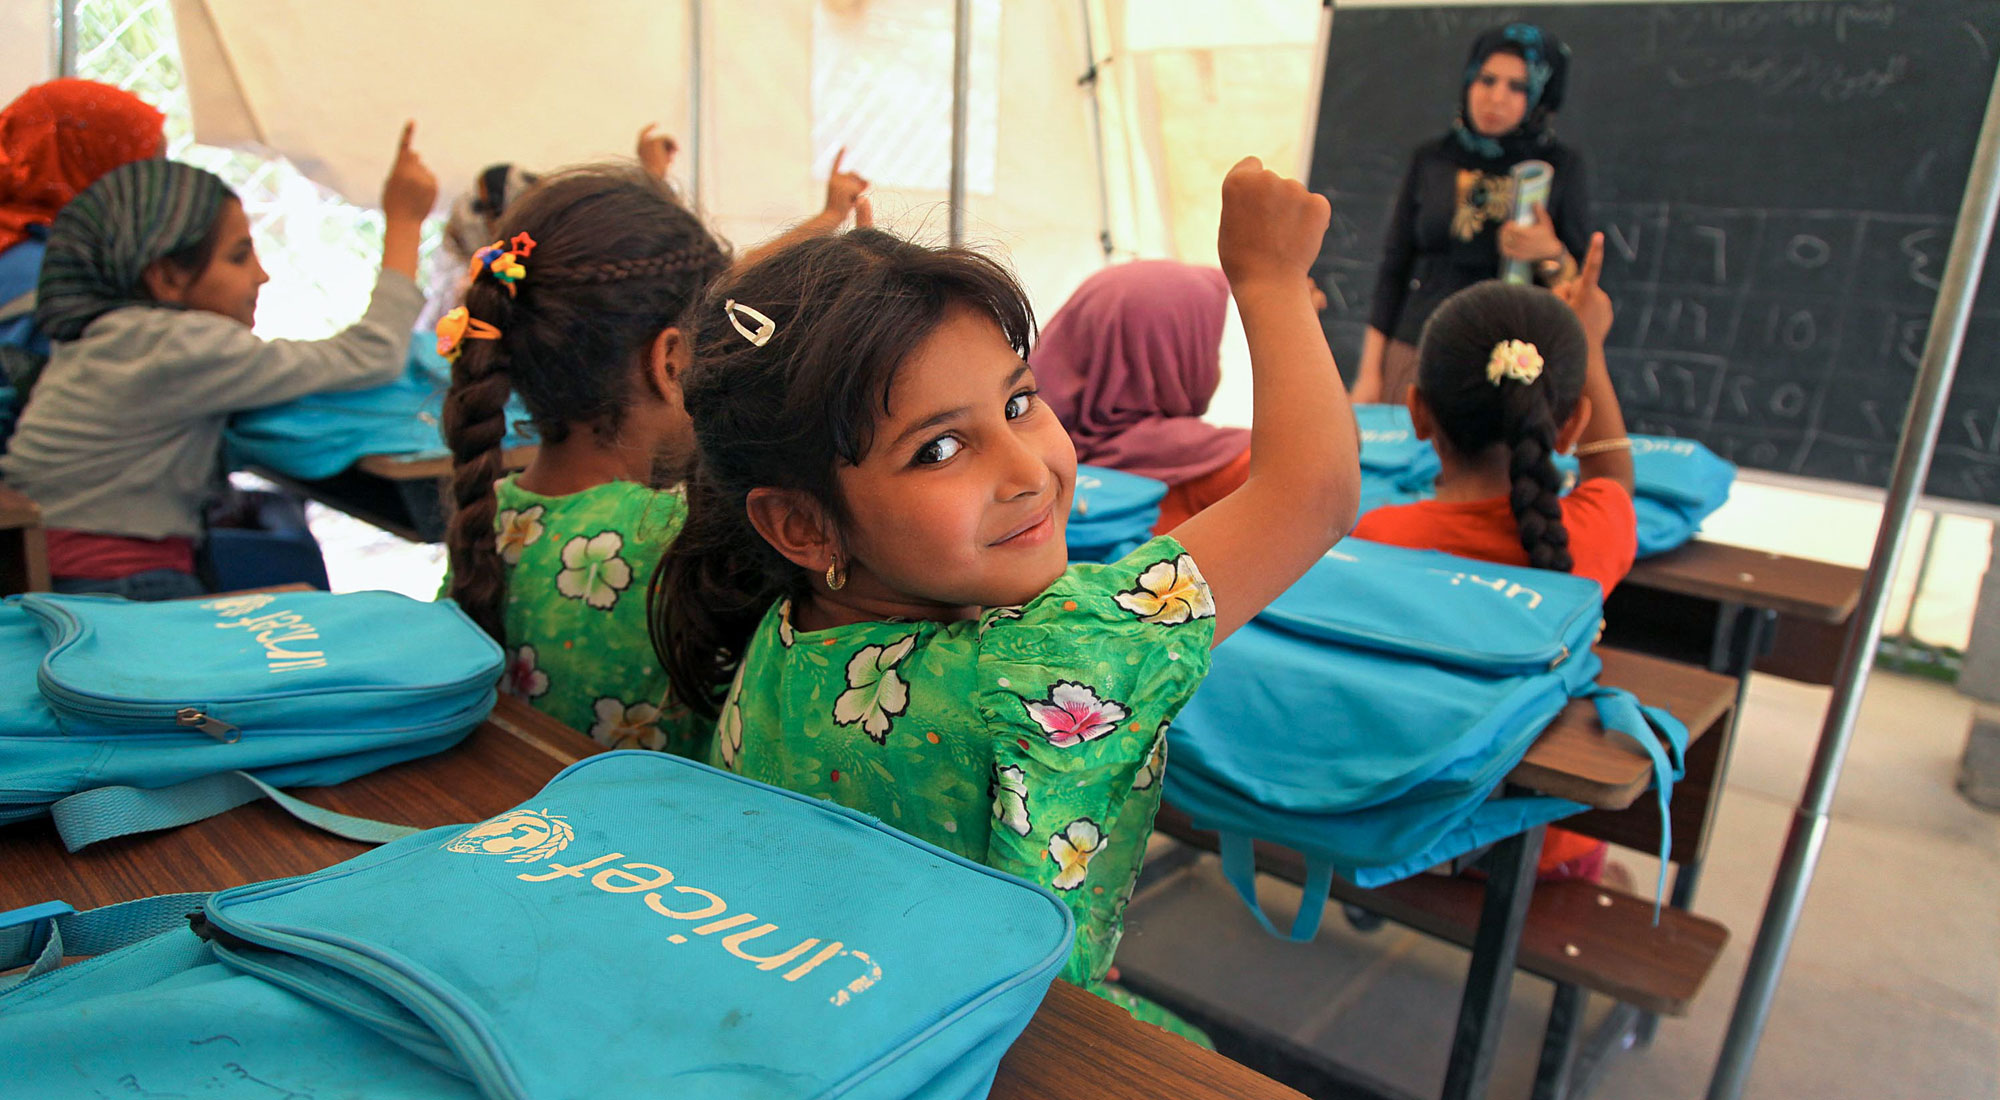 On 16 June a student raises her hand to answer a question from her teacher Hiba Ahmed in a tent classroom at the Al-Takya Al-Kaznazaniya school in Al-Takya Al-Kaznazaniya IDP camp, near Baghdad.